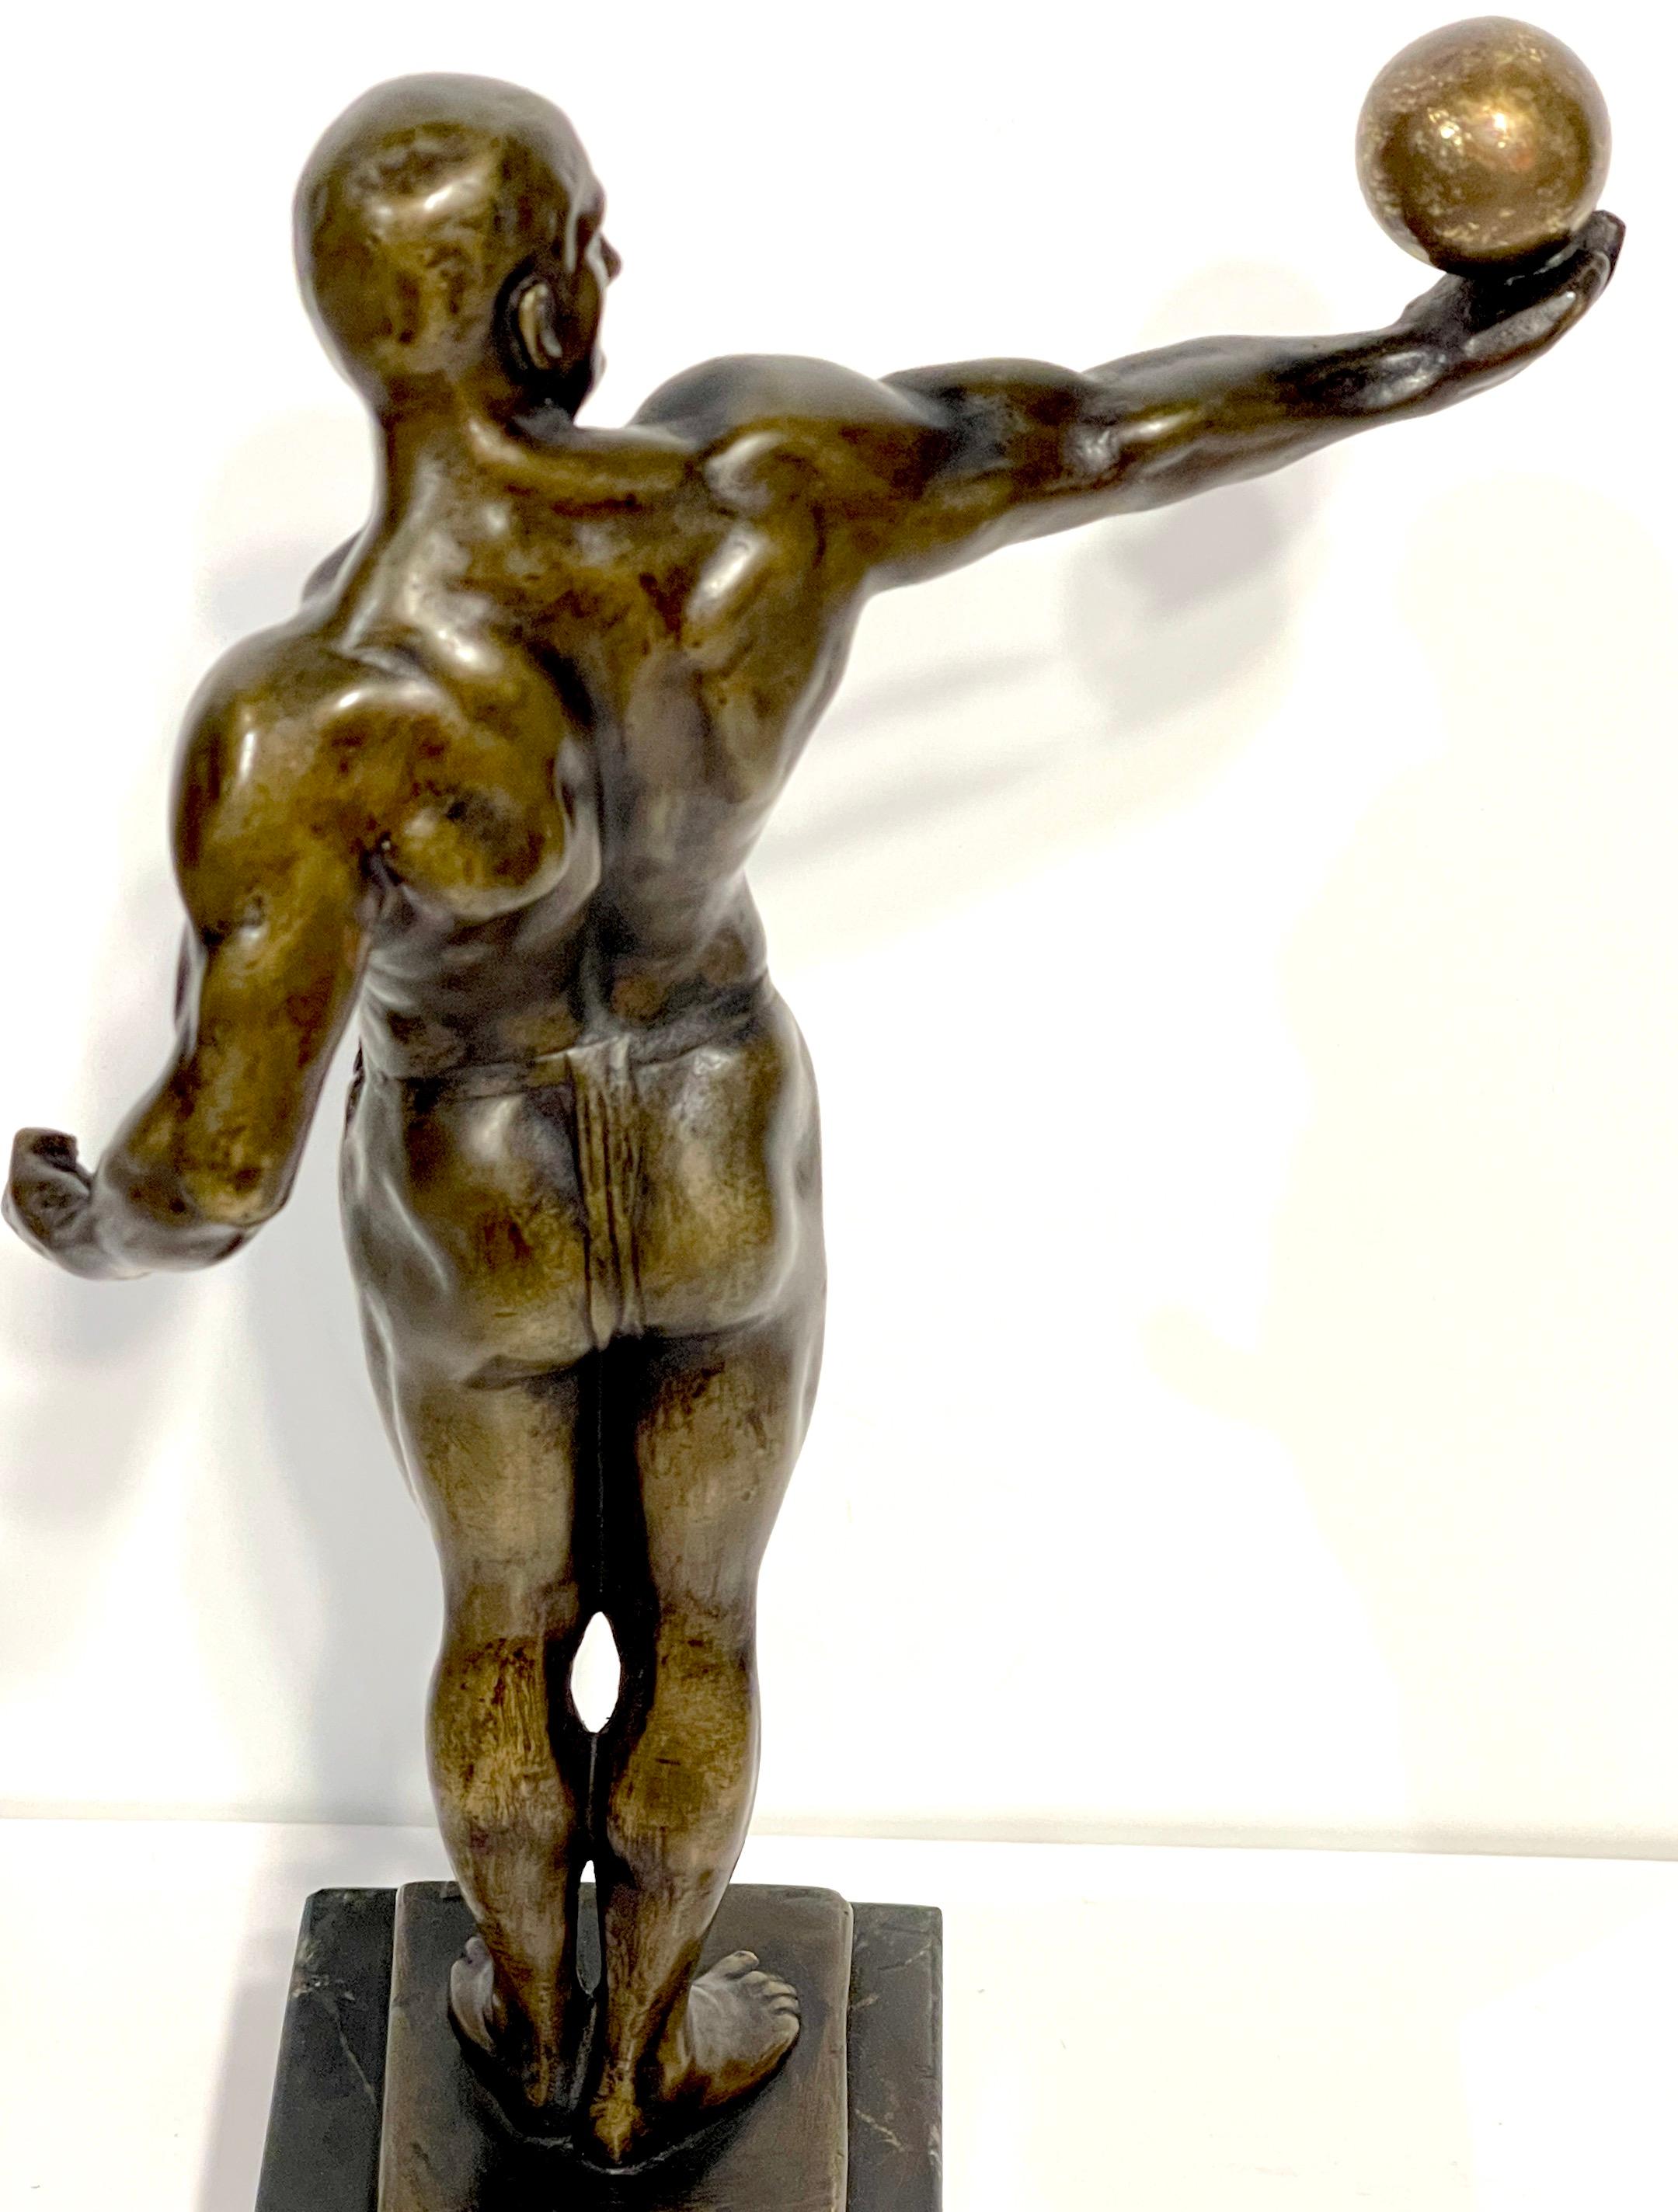 1920s German Greco-Roman Style Bronze Male Physique Sculpture by S. Bauer  3